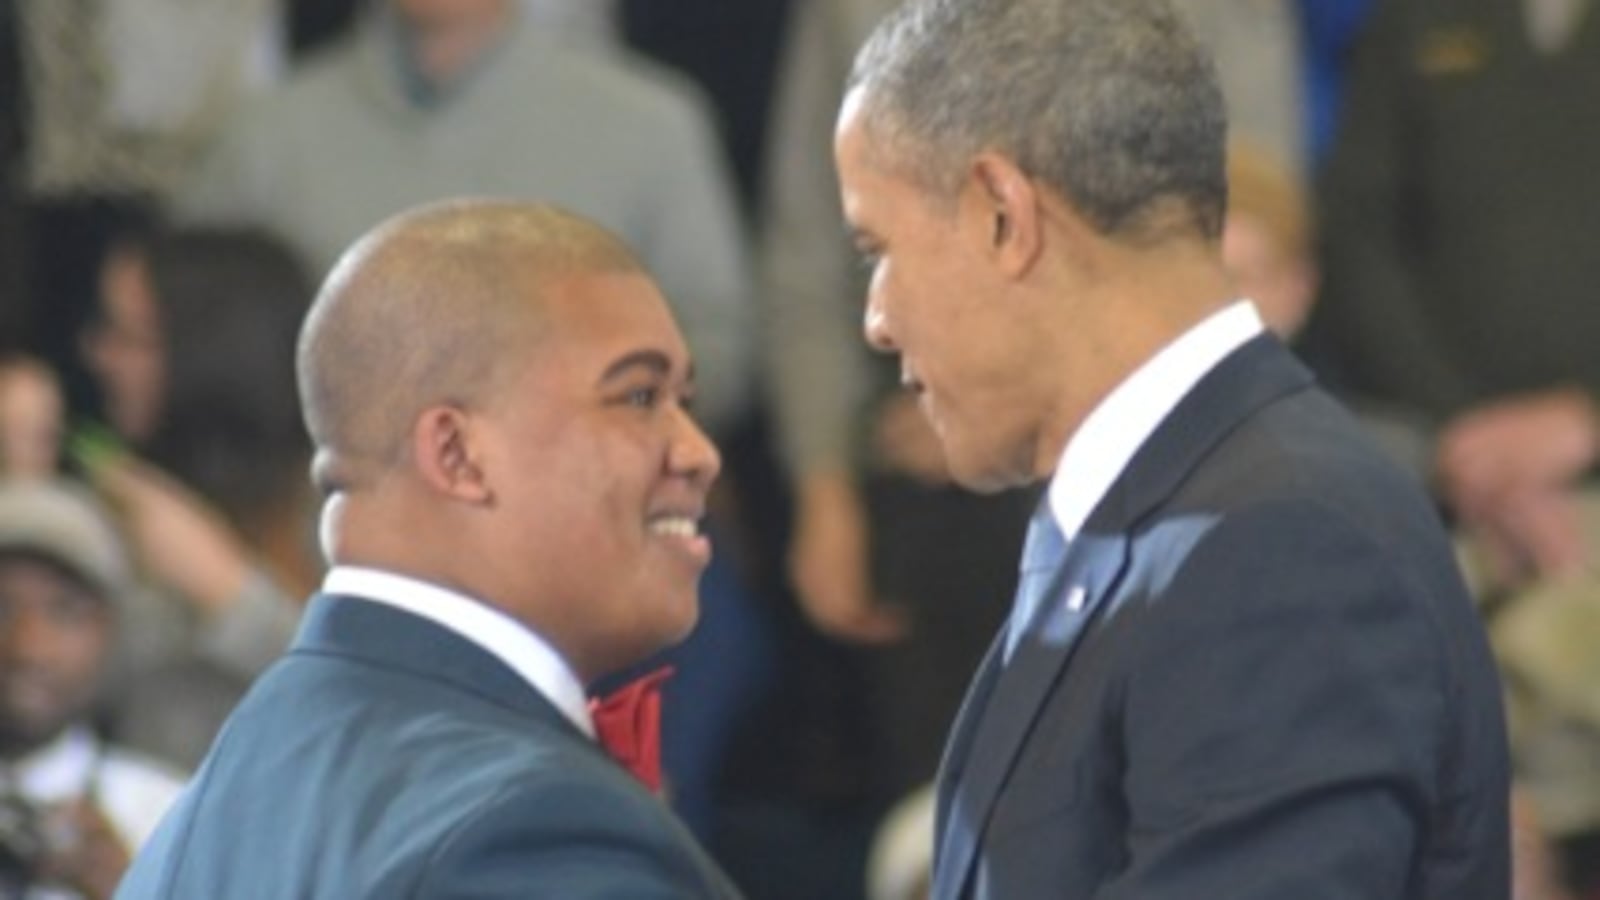 President Obama greets Ronald Elliott, then the student body president of McGavock High School, during one of his recent Nashville visits.